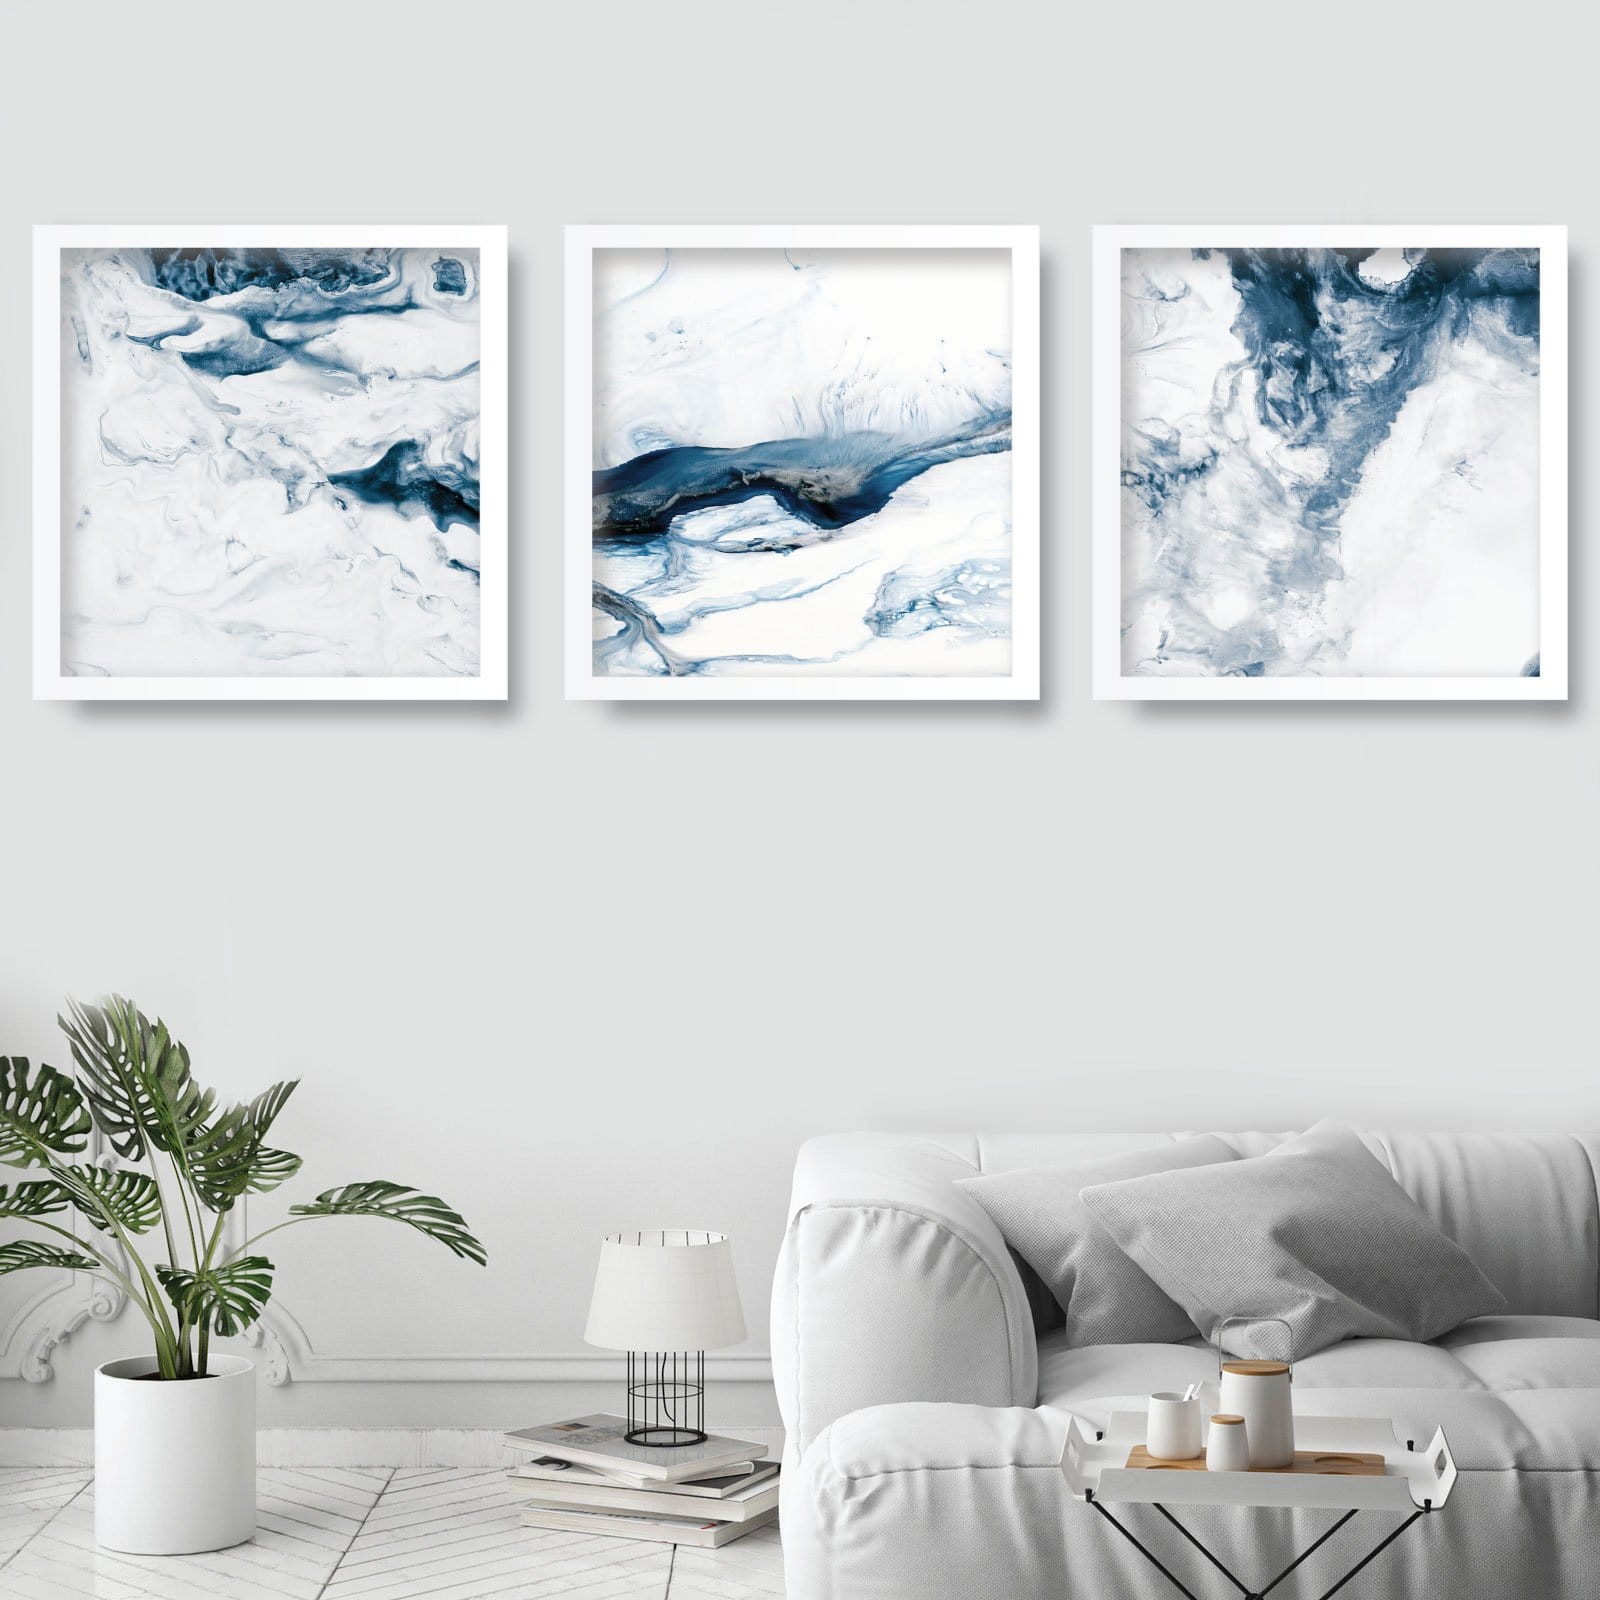 Set of 3 SQUARE Abstract Ocean Navy Blue & White Art Prints of Paintings 